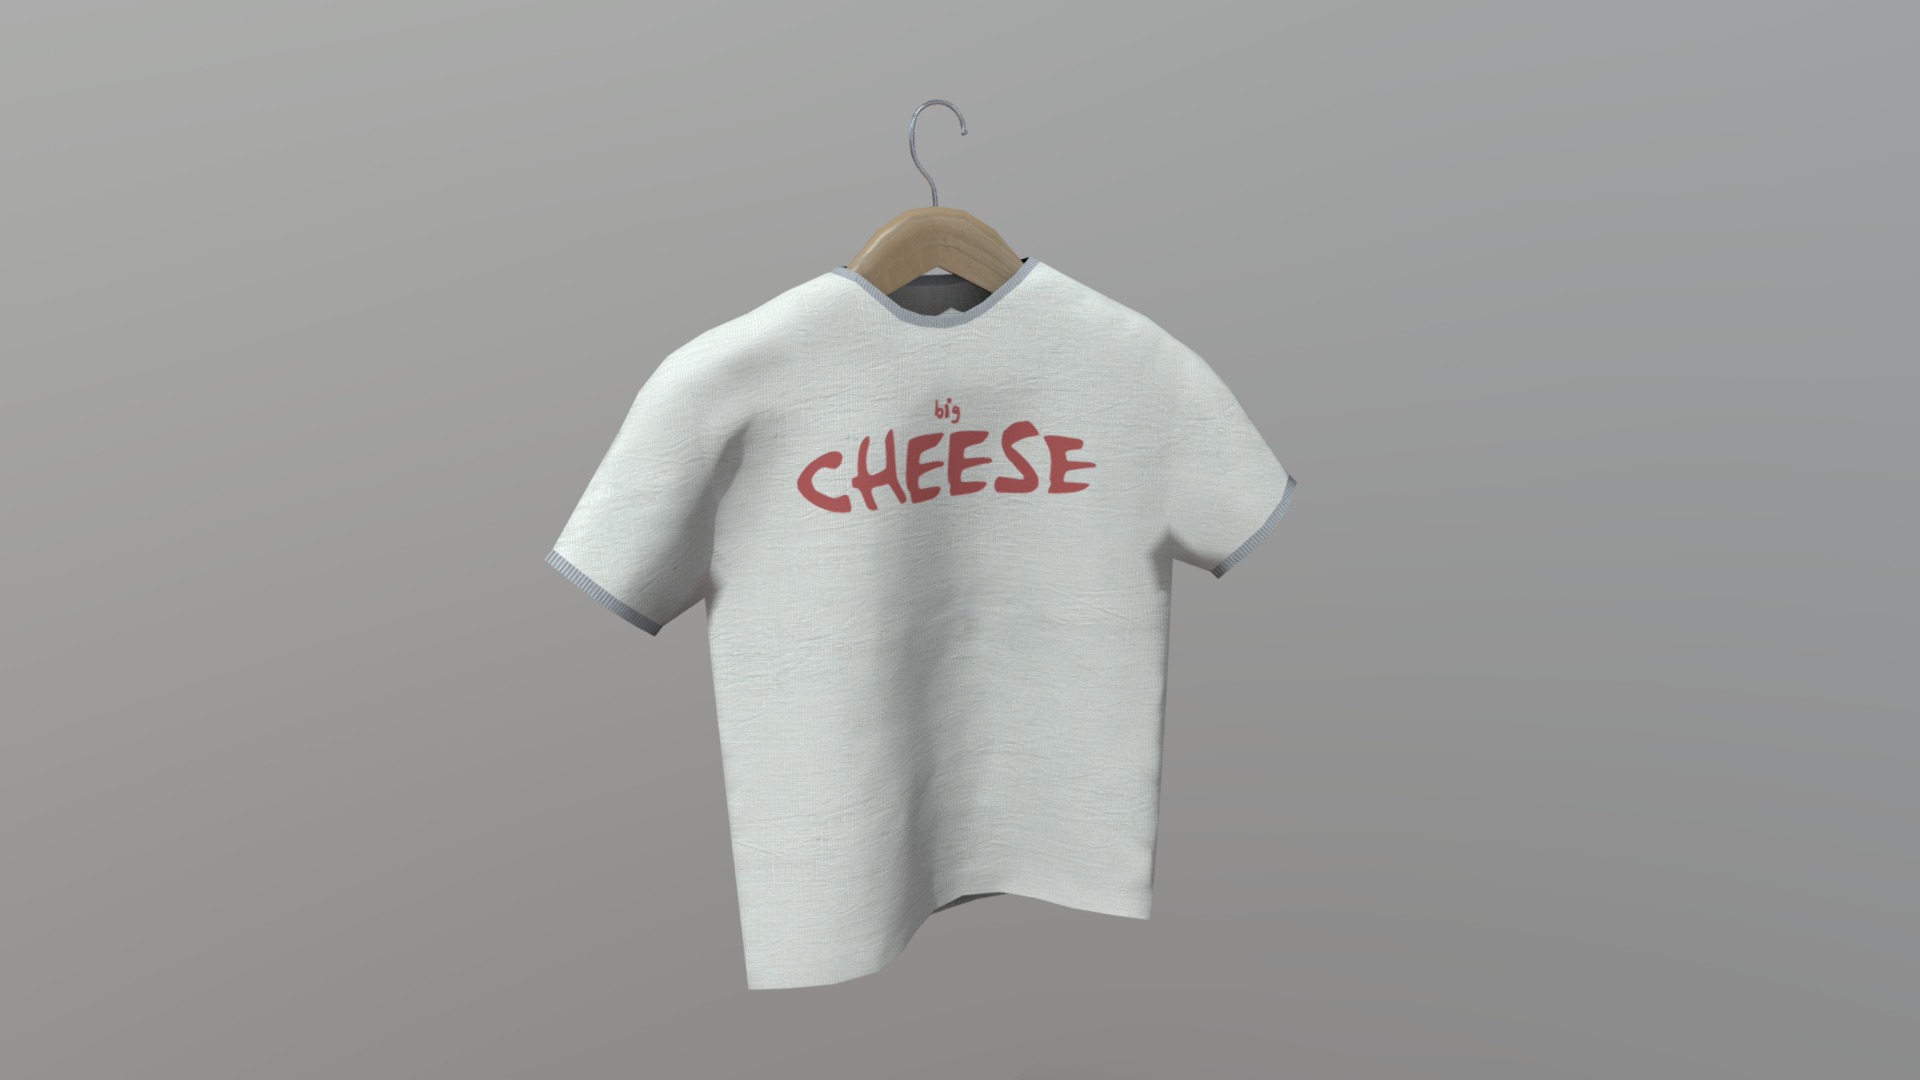 3D model Shirt On Hanger - This is a 3D model of the Shirt On Hanger. The 3D model is about a white t-shirt with red text on it.